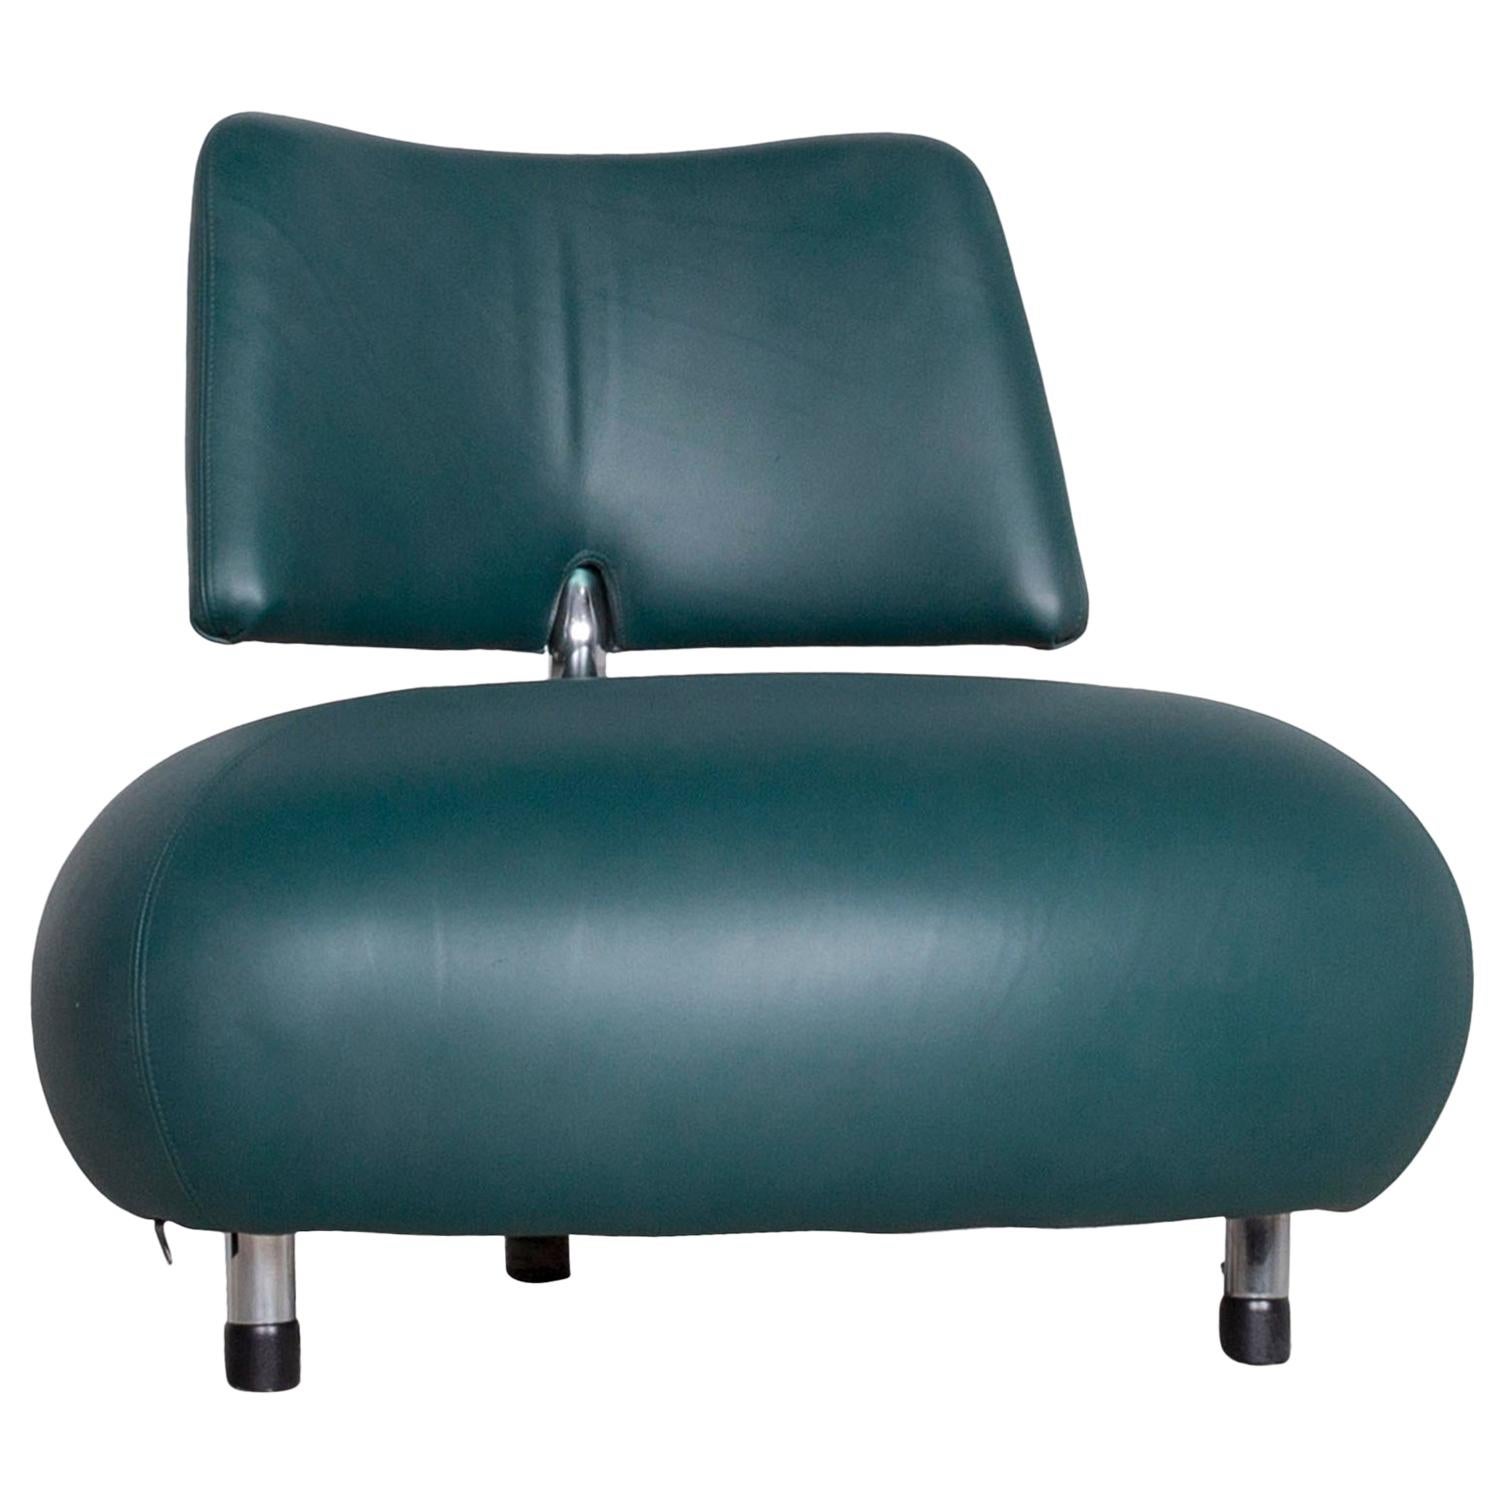 Leolux Pallone Pa Designer Chair Leather Green Modern For Sale